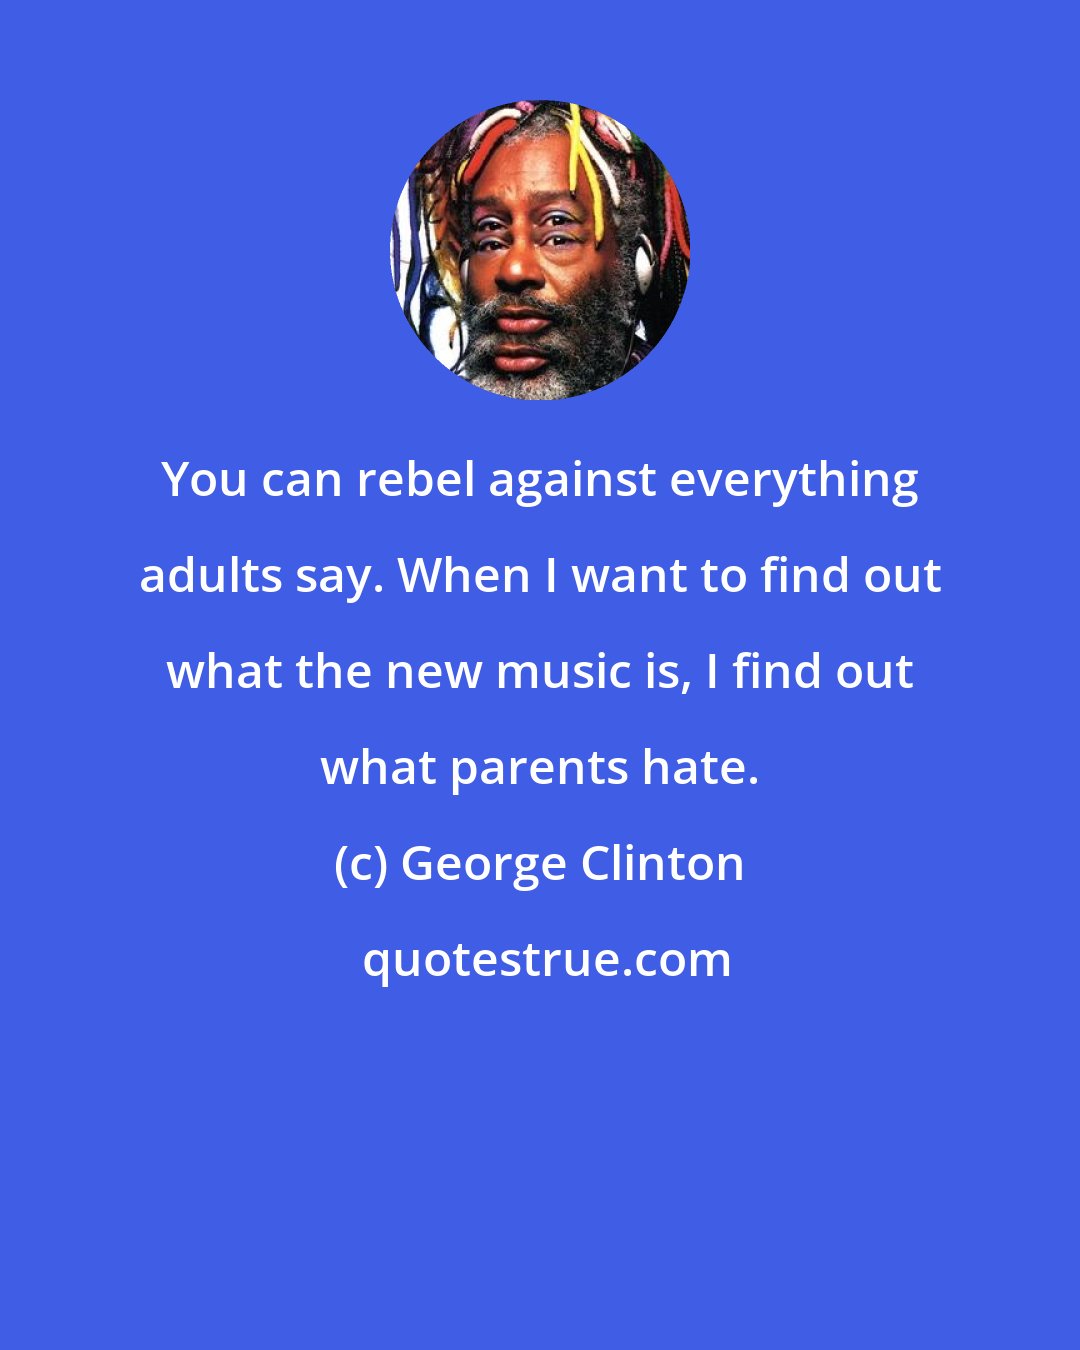 George Clinton: You can rebel against everything adults say. When I want to find out what the new music is, I find out what parents hate.